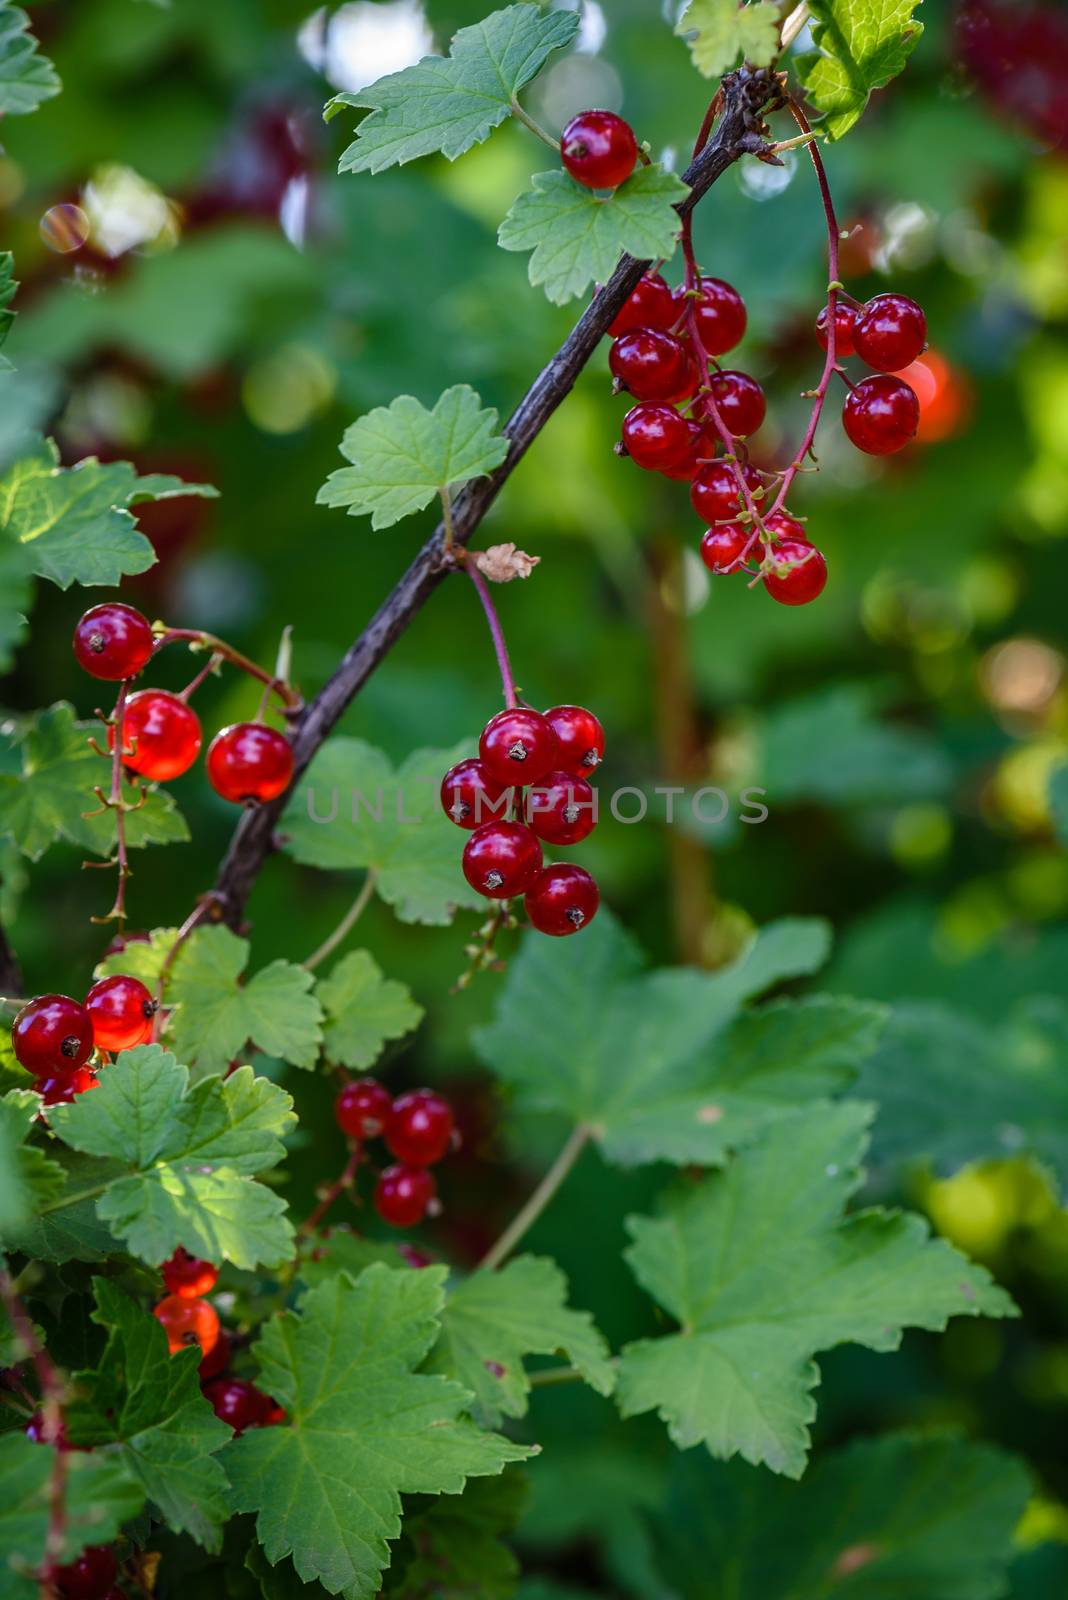 bunches of ripe red currant hang on a branch in the garden by Seva_blsv